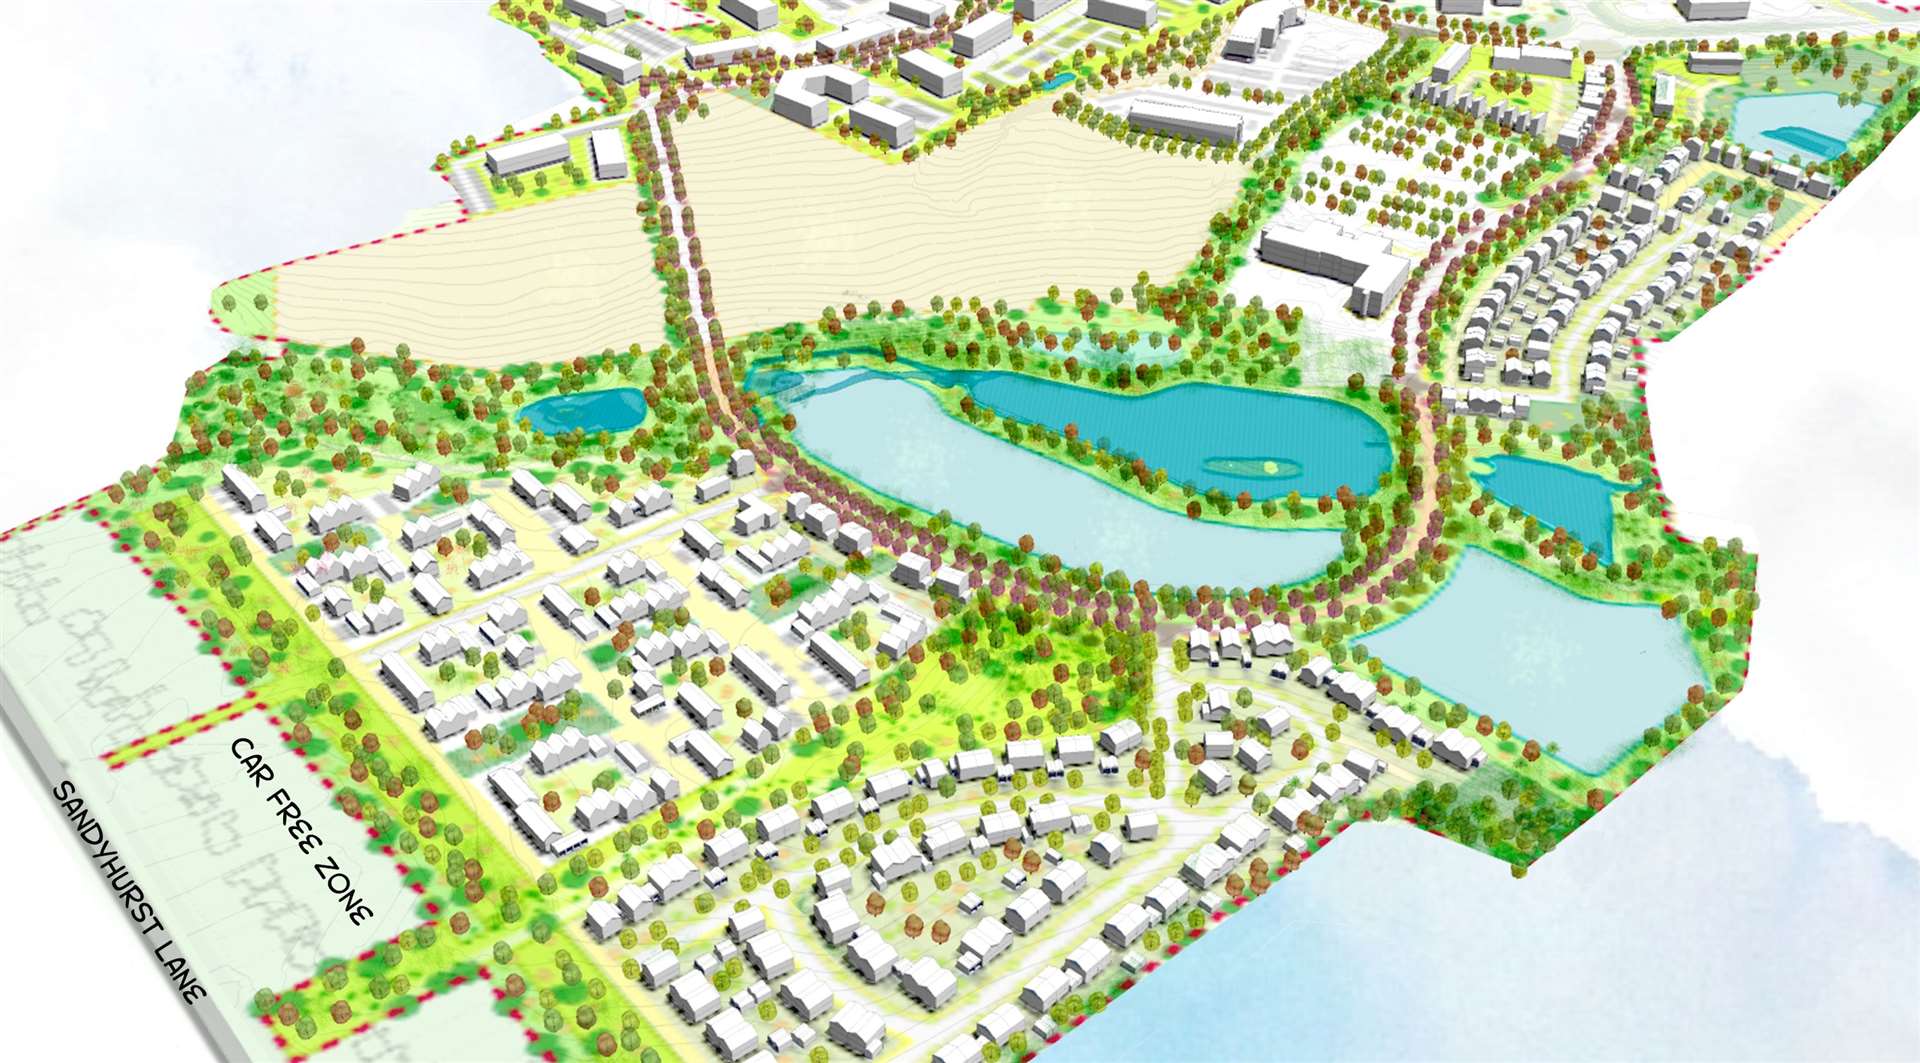 An artist's impression of the proposed development between Sandyhurst Lane and Trinity Road